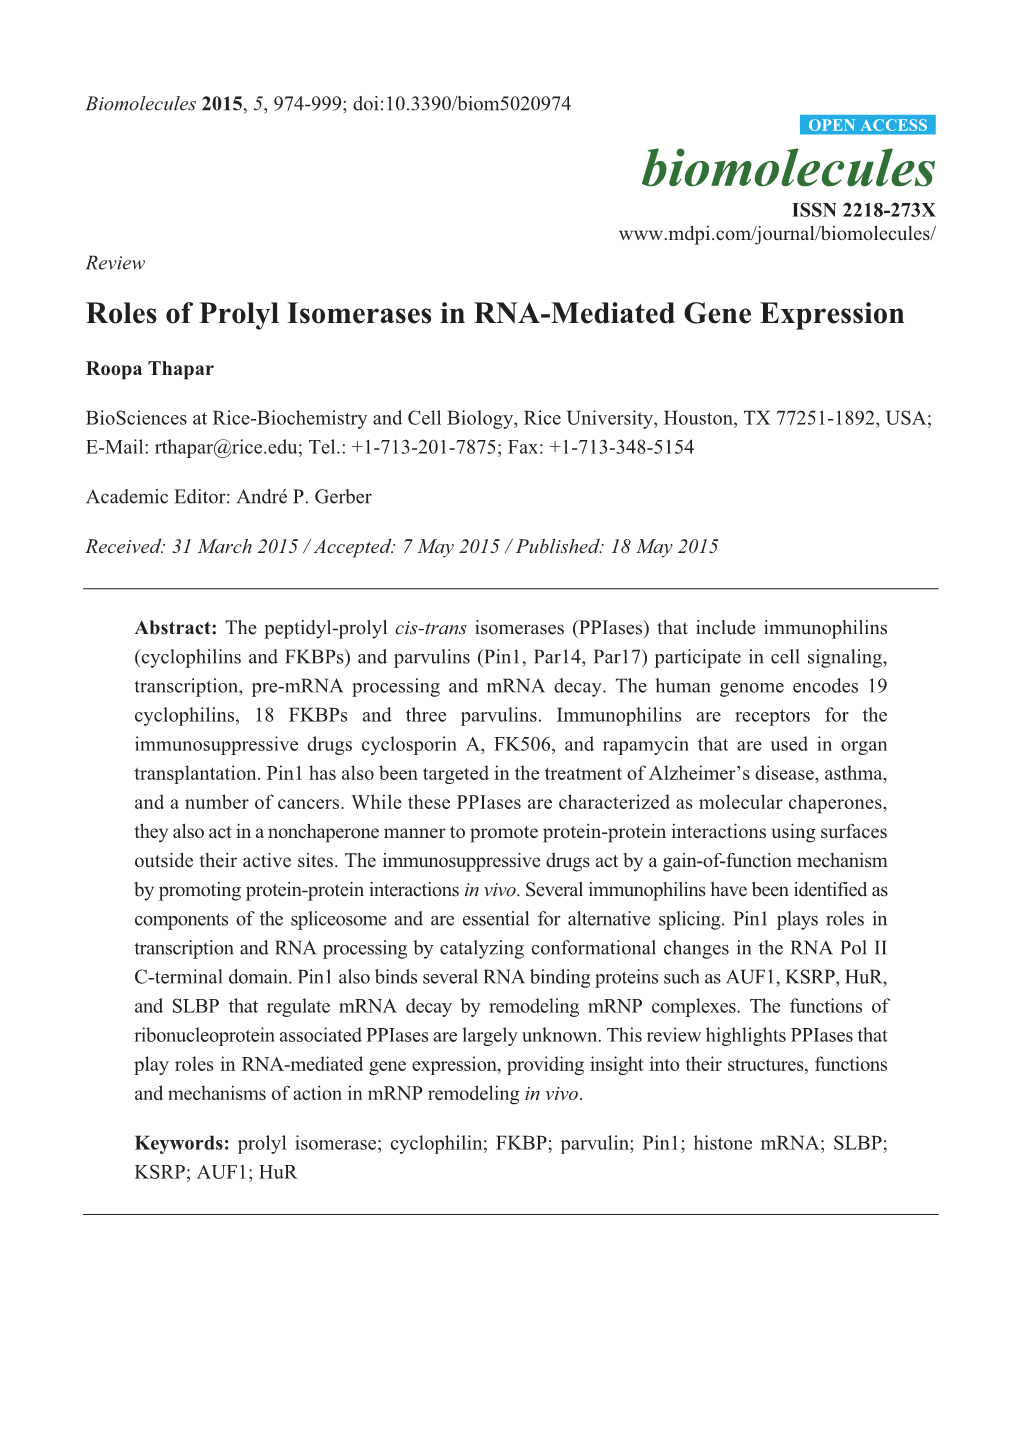 Roles of Prolyl Isomerases in RNA-Mediated Gene Expression